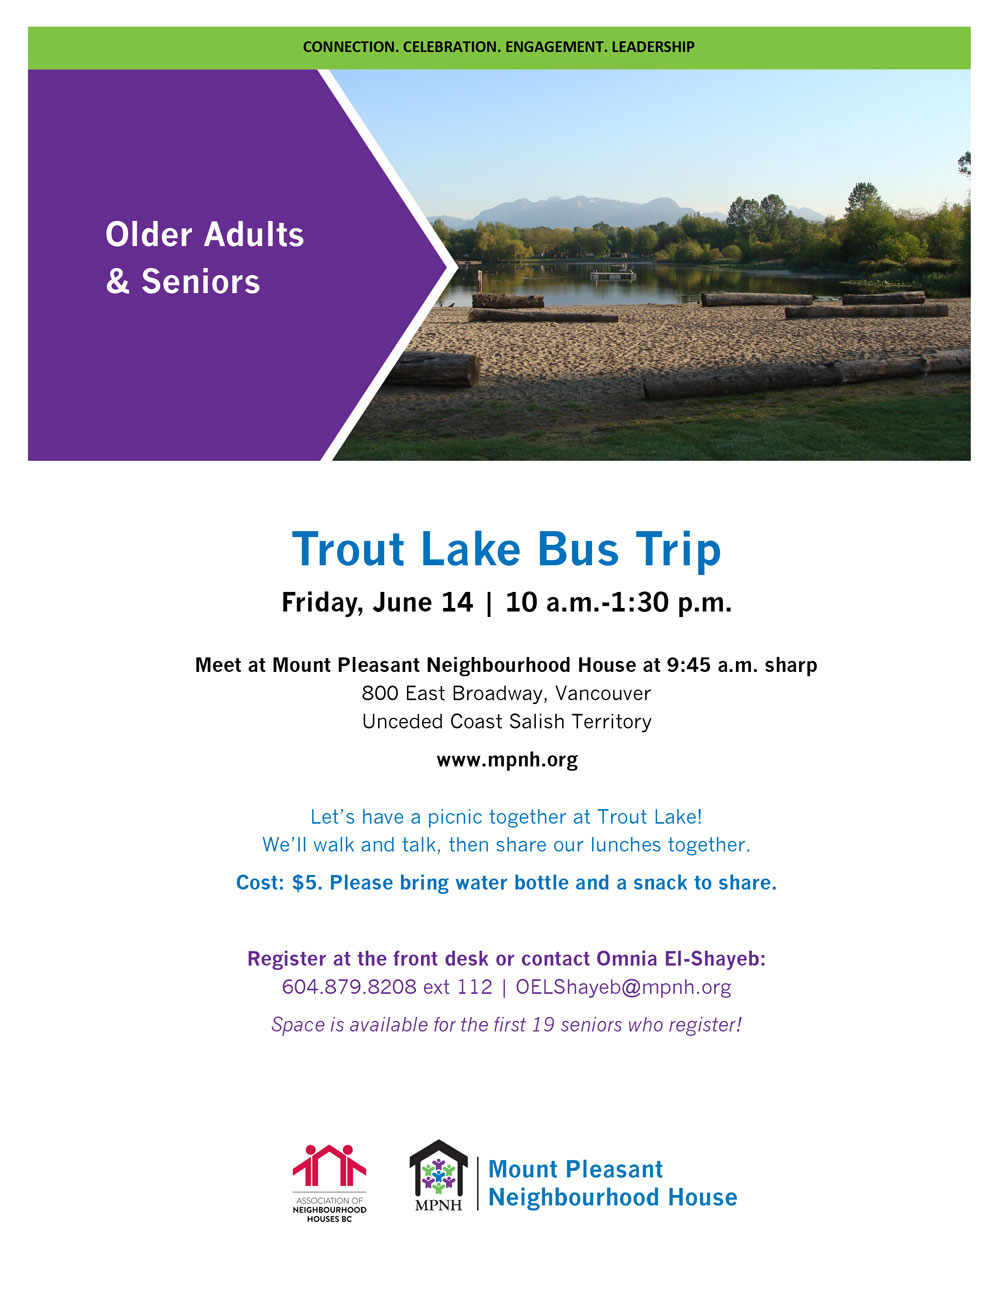 An image of the poster with event details, featuring an image of the beach at Trout Lake, with trees and mountains in the background.